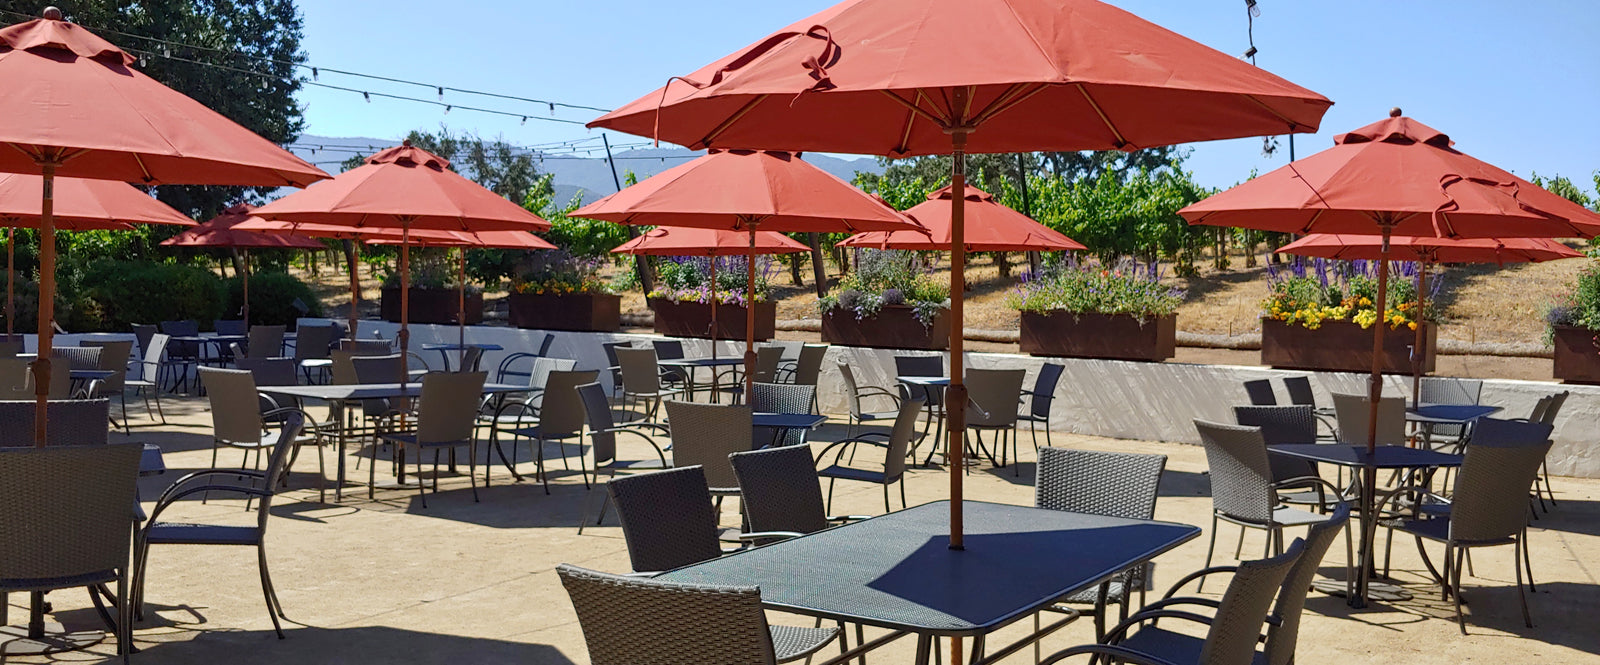 Outdoor Patio Furniture in an outdoor restaurant patio setting.